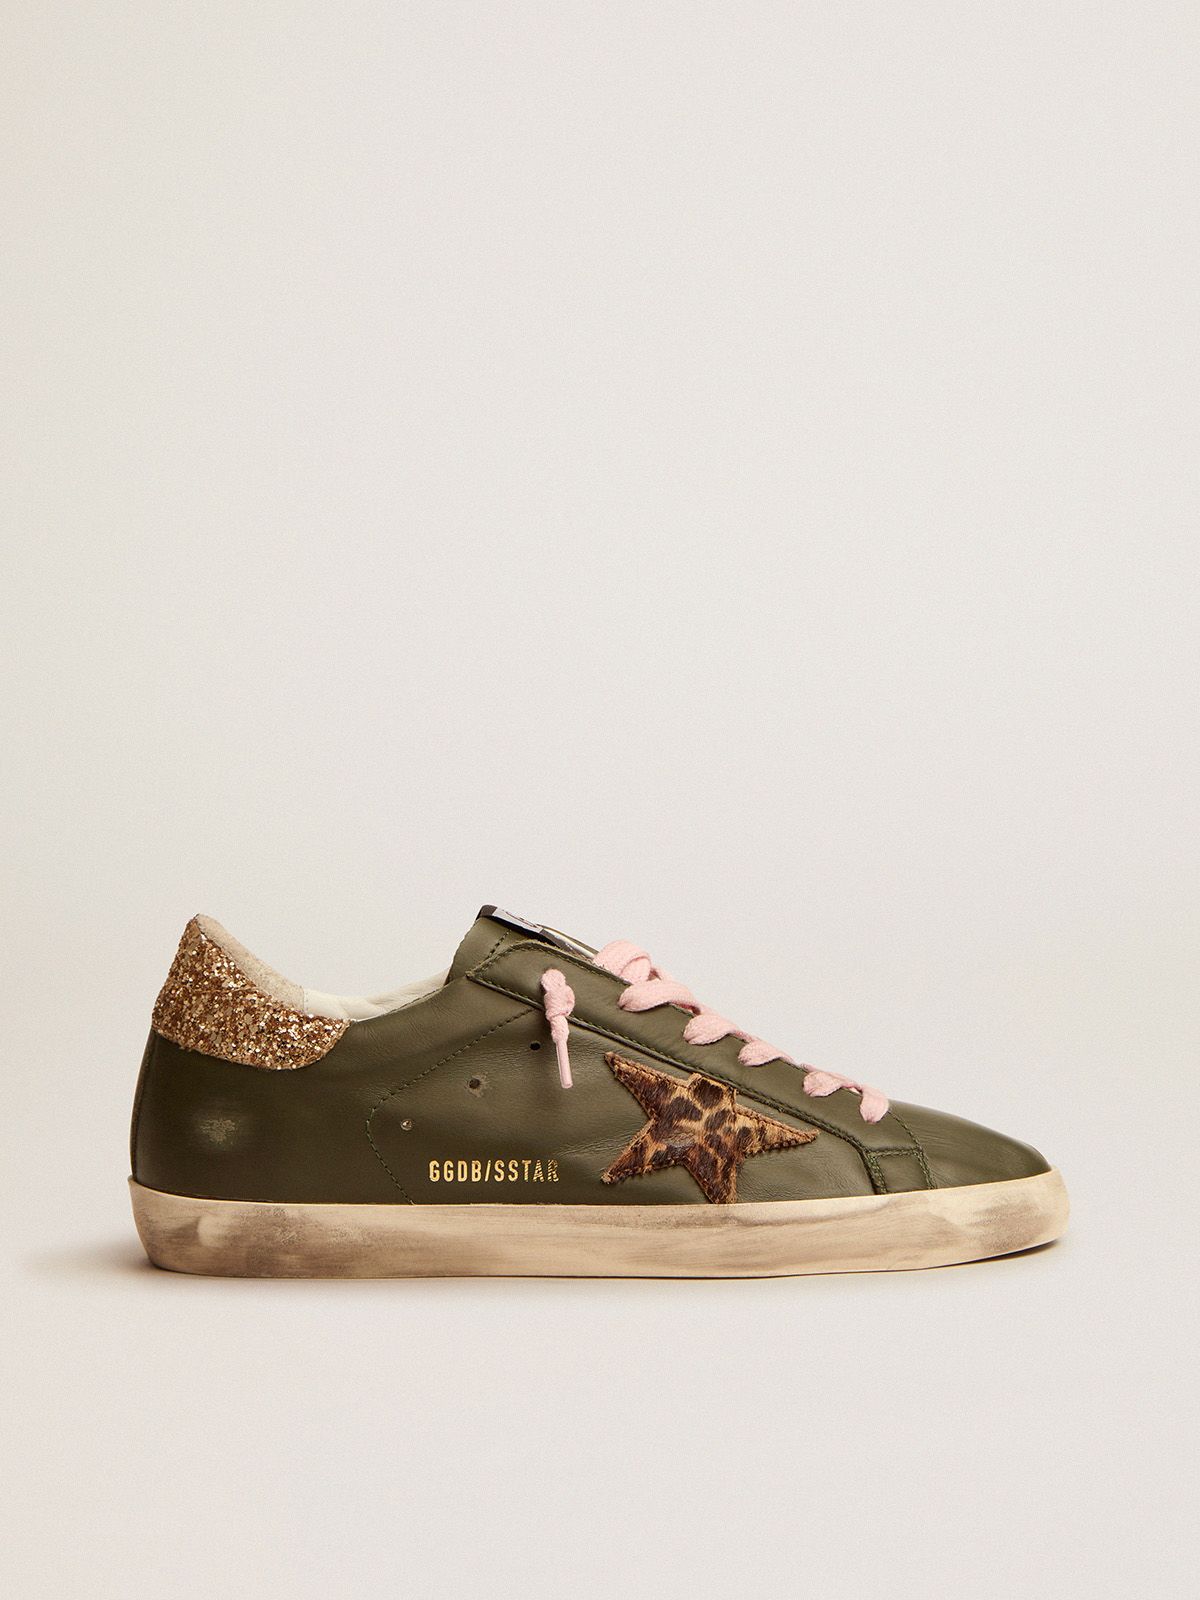 golden goose heel with glitter green sneakers leather Super-Star tab in dark gold